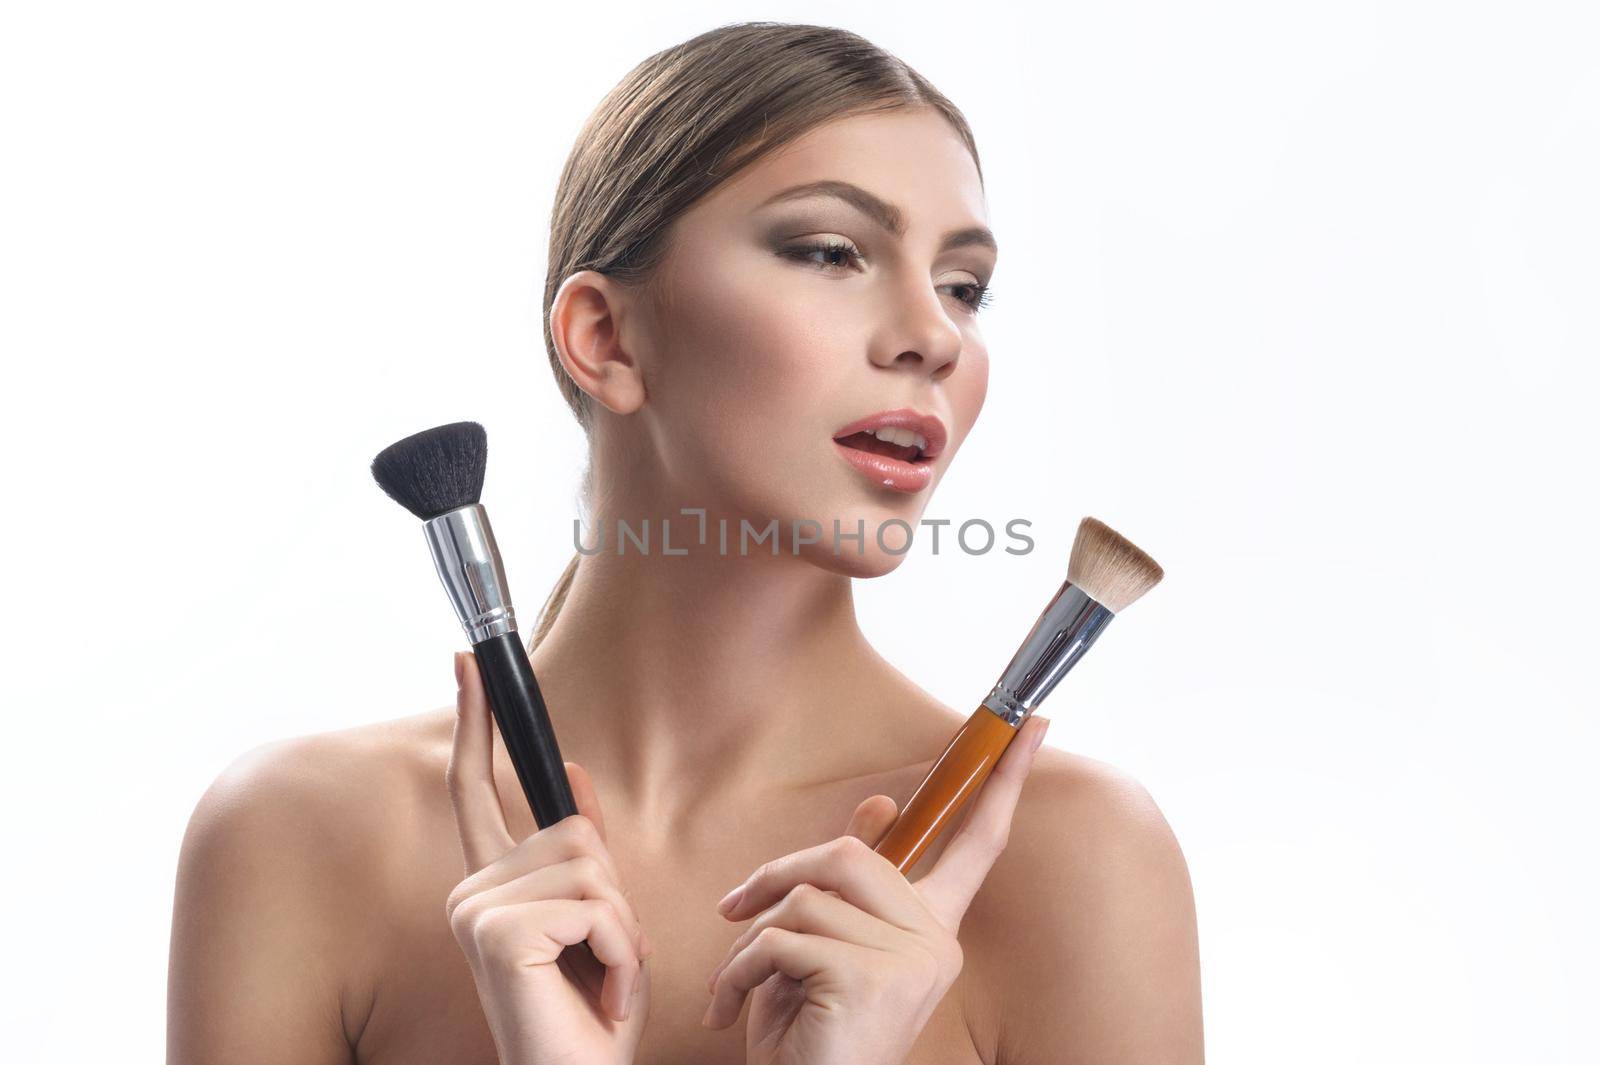 Glowing beauty. Beautiful young woman with professional makeup applied posing with two makeup brushes looking away copyspace beauty cosmetics fashion style artist stylist profession industry concept